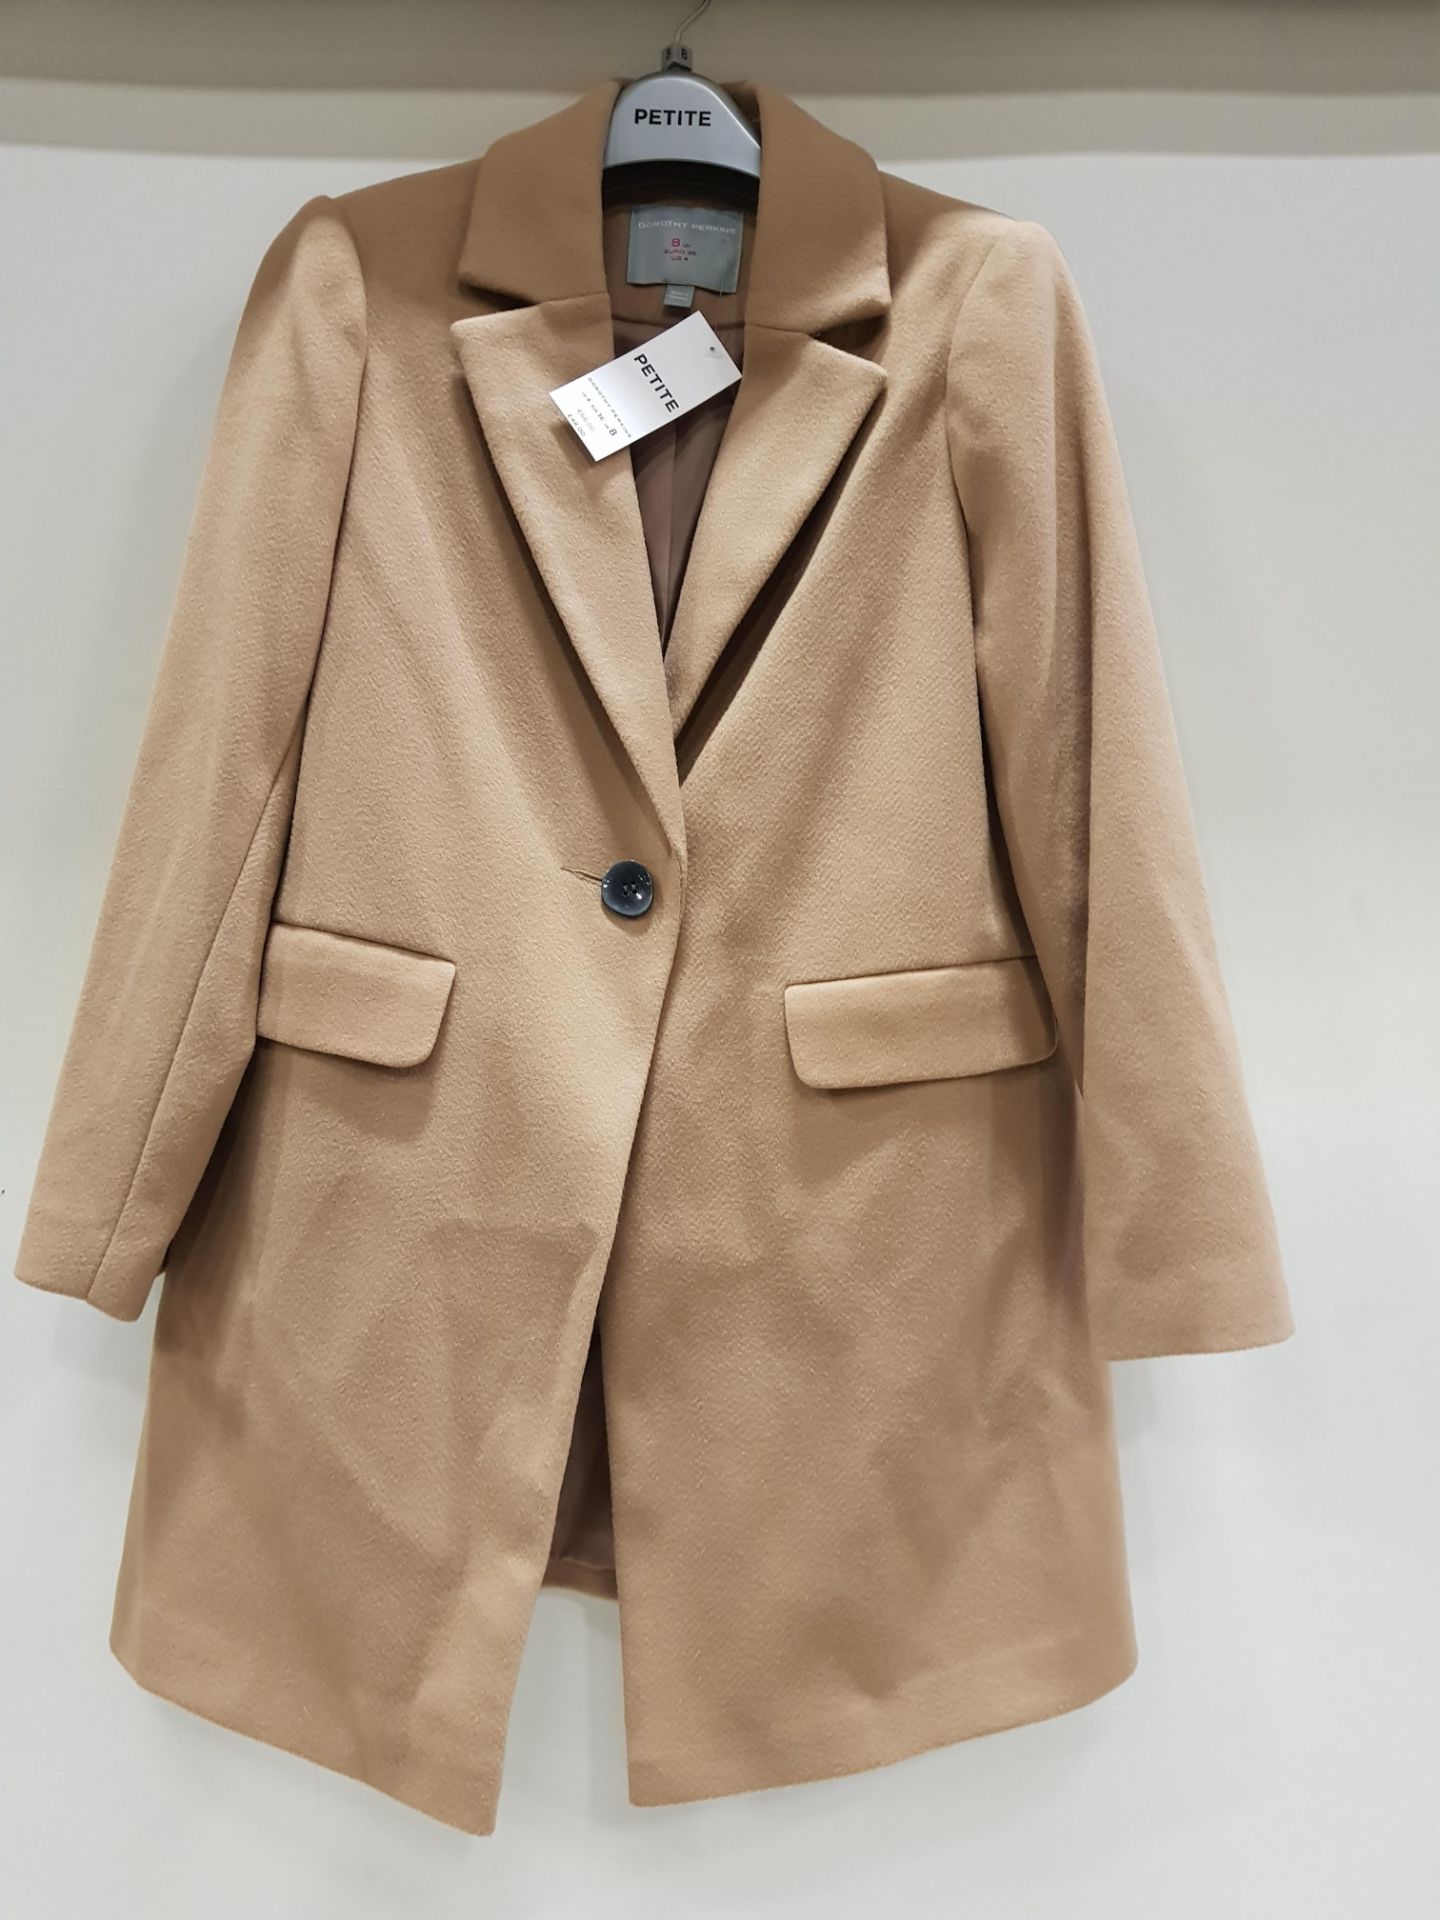 10 X BRAND NEW DOROTHY PERKINS PETITE SINGLE BUTTONED JACKETS IN SIZE UK 8 - IN TAN COLOUR ( RRP £